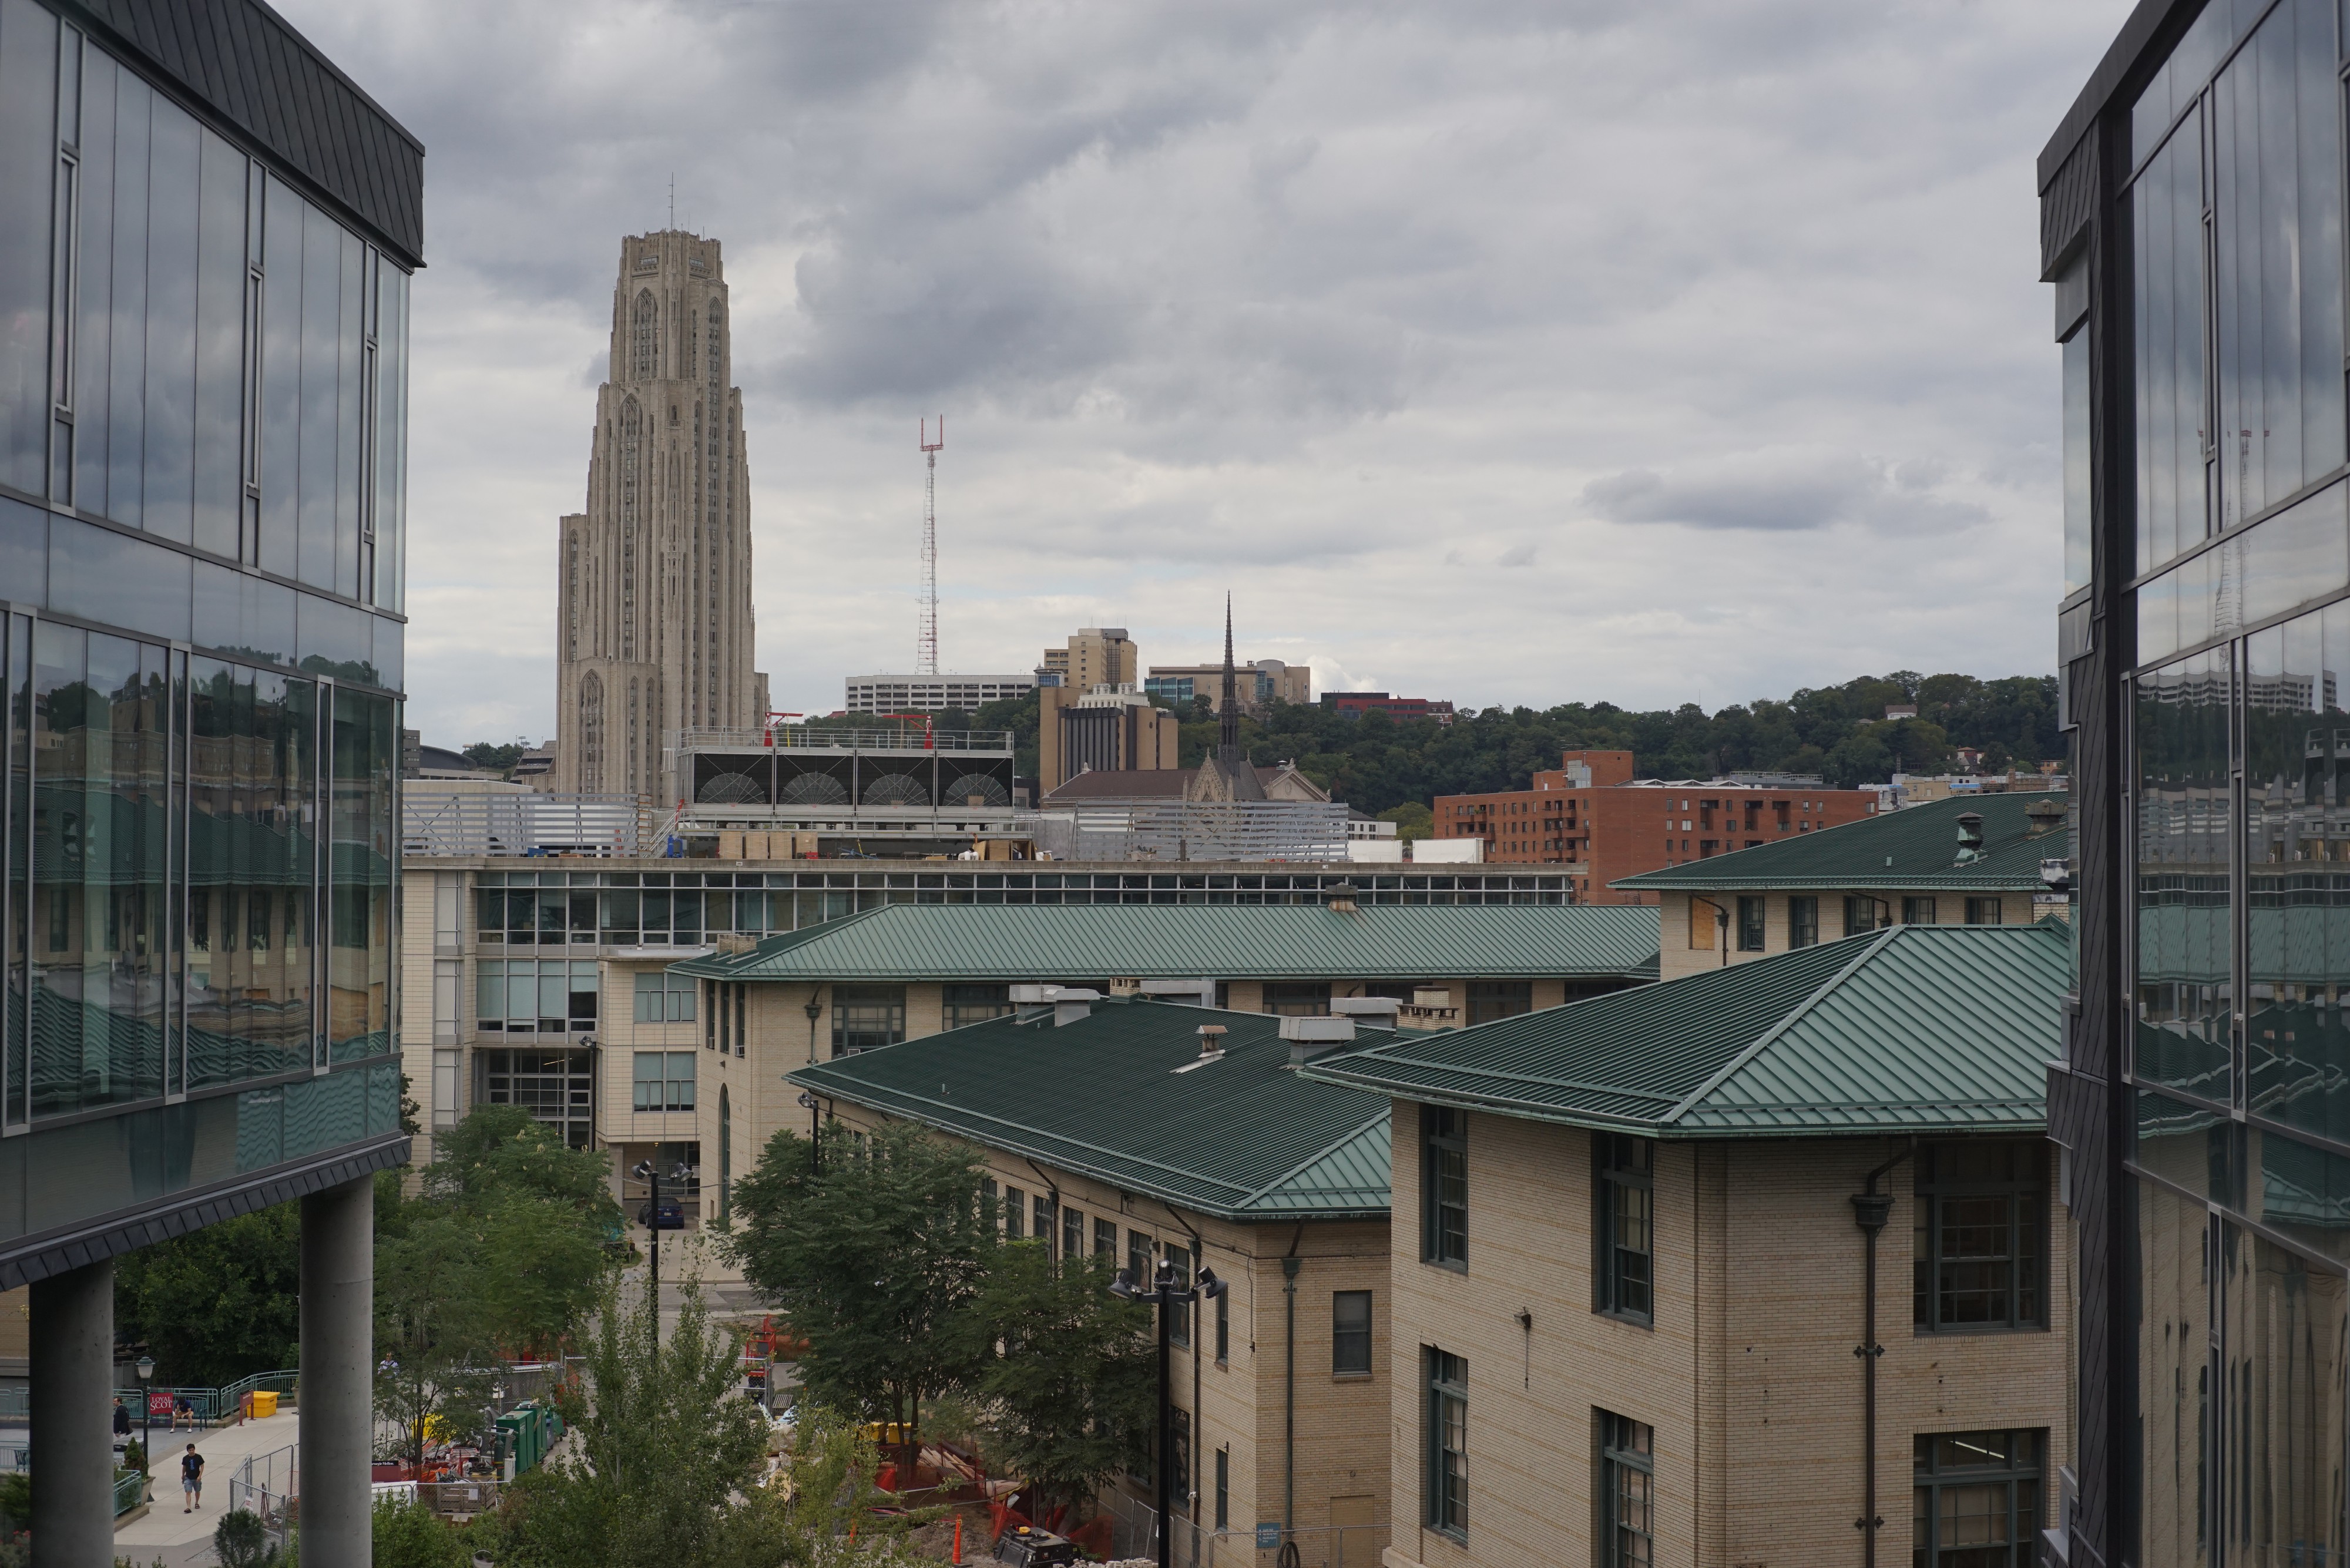 Cathedral of Learning as seen from Gates Hillman Center